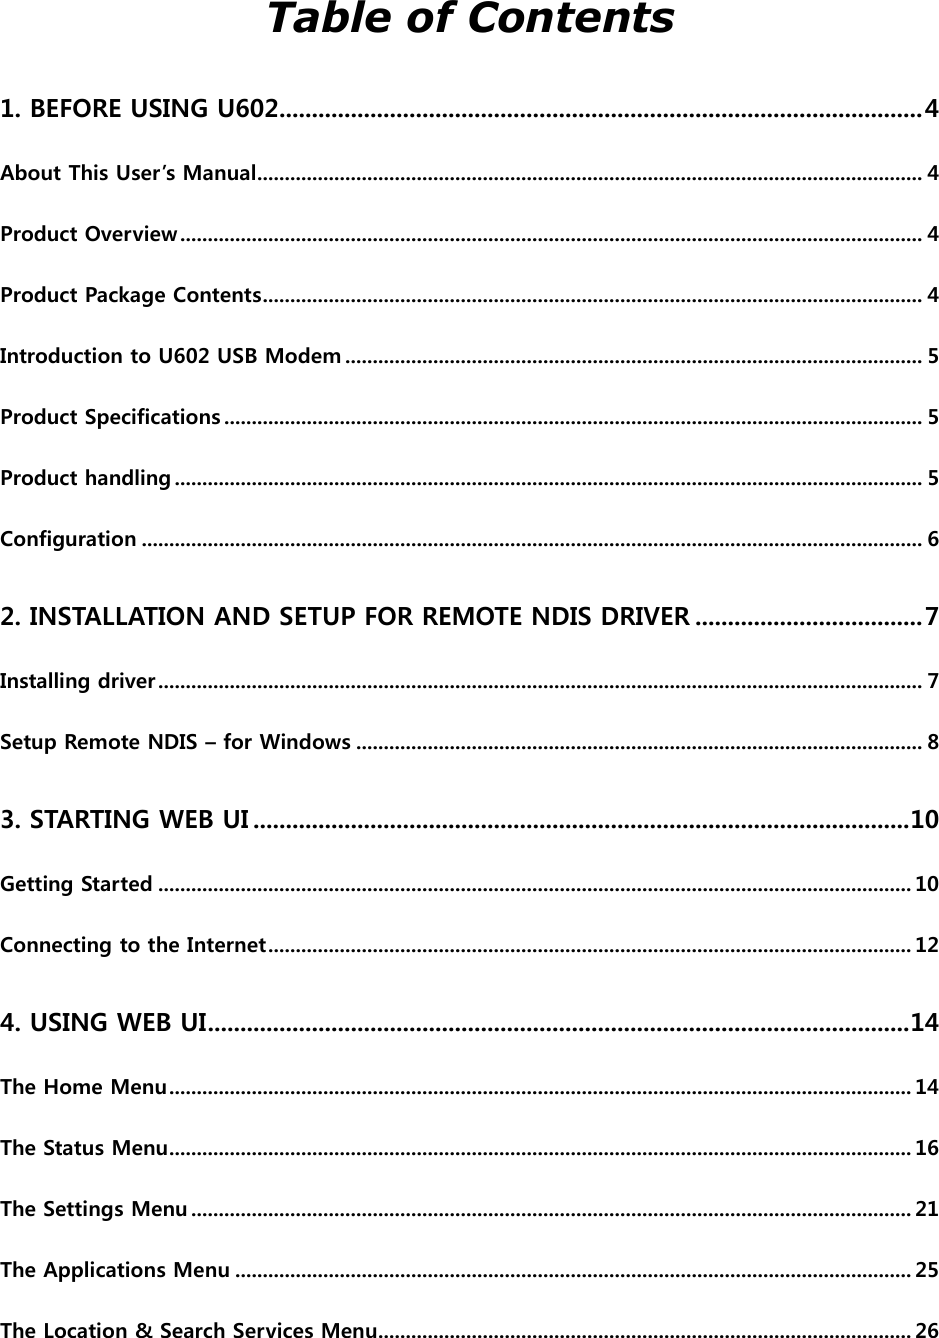  Table of Contents 1. BEFORE USING U602................................................................................................... 4 About This User’s Manual ......................................................................................................................... 4 Product Overview ....................................................................................................................................... 4 Product Package Contents ........................................................................................................................ 4 Introduction to U602 USB Modem ......................................................................................................... 5 Product Specifications ............................................................................................................................... 5 Product handling ........................................................................................................................................ 5 Configuration .............................................................................................................................................. 6 2. INSTALLATION AND SETUP FOR REMOTE NDIS DRIVER ................................... 7 Installing driver ........................................................................................................................................... 7 Setup Remote NDIS – for Windows ....................................................................................................... 8 3. STARTING WEB UI ..................................................................................................... 10 Getting Started ......................................................................................................................................... 10 Connecting to the Internet ..................................................................................................................... 12 4. USING WEB UI ............................................................................................................ 14 The Home Menu ....................................................................................................................................... 14 The Status Menu ....................................................................................................................................... 16 The Settings Menu ................................................................................................................................... 21 The Applications Menu ........................................................................................................................... 25 The Location &amp; Search Services Menu................................................................................................. 26 